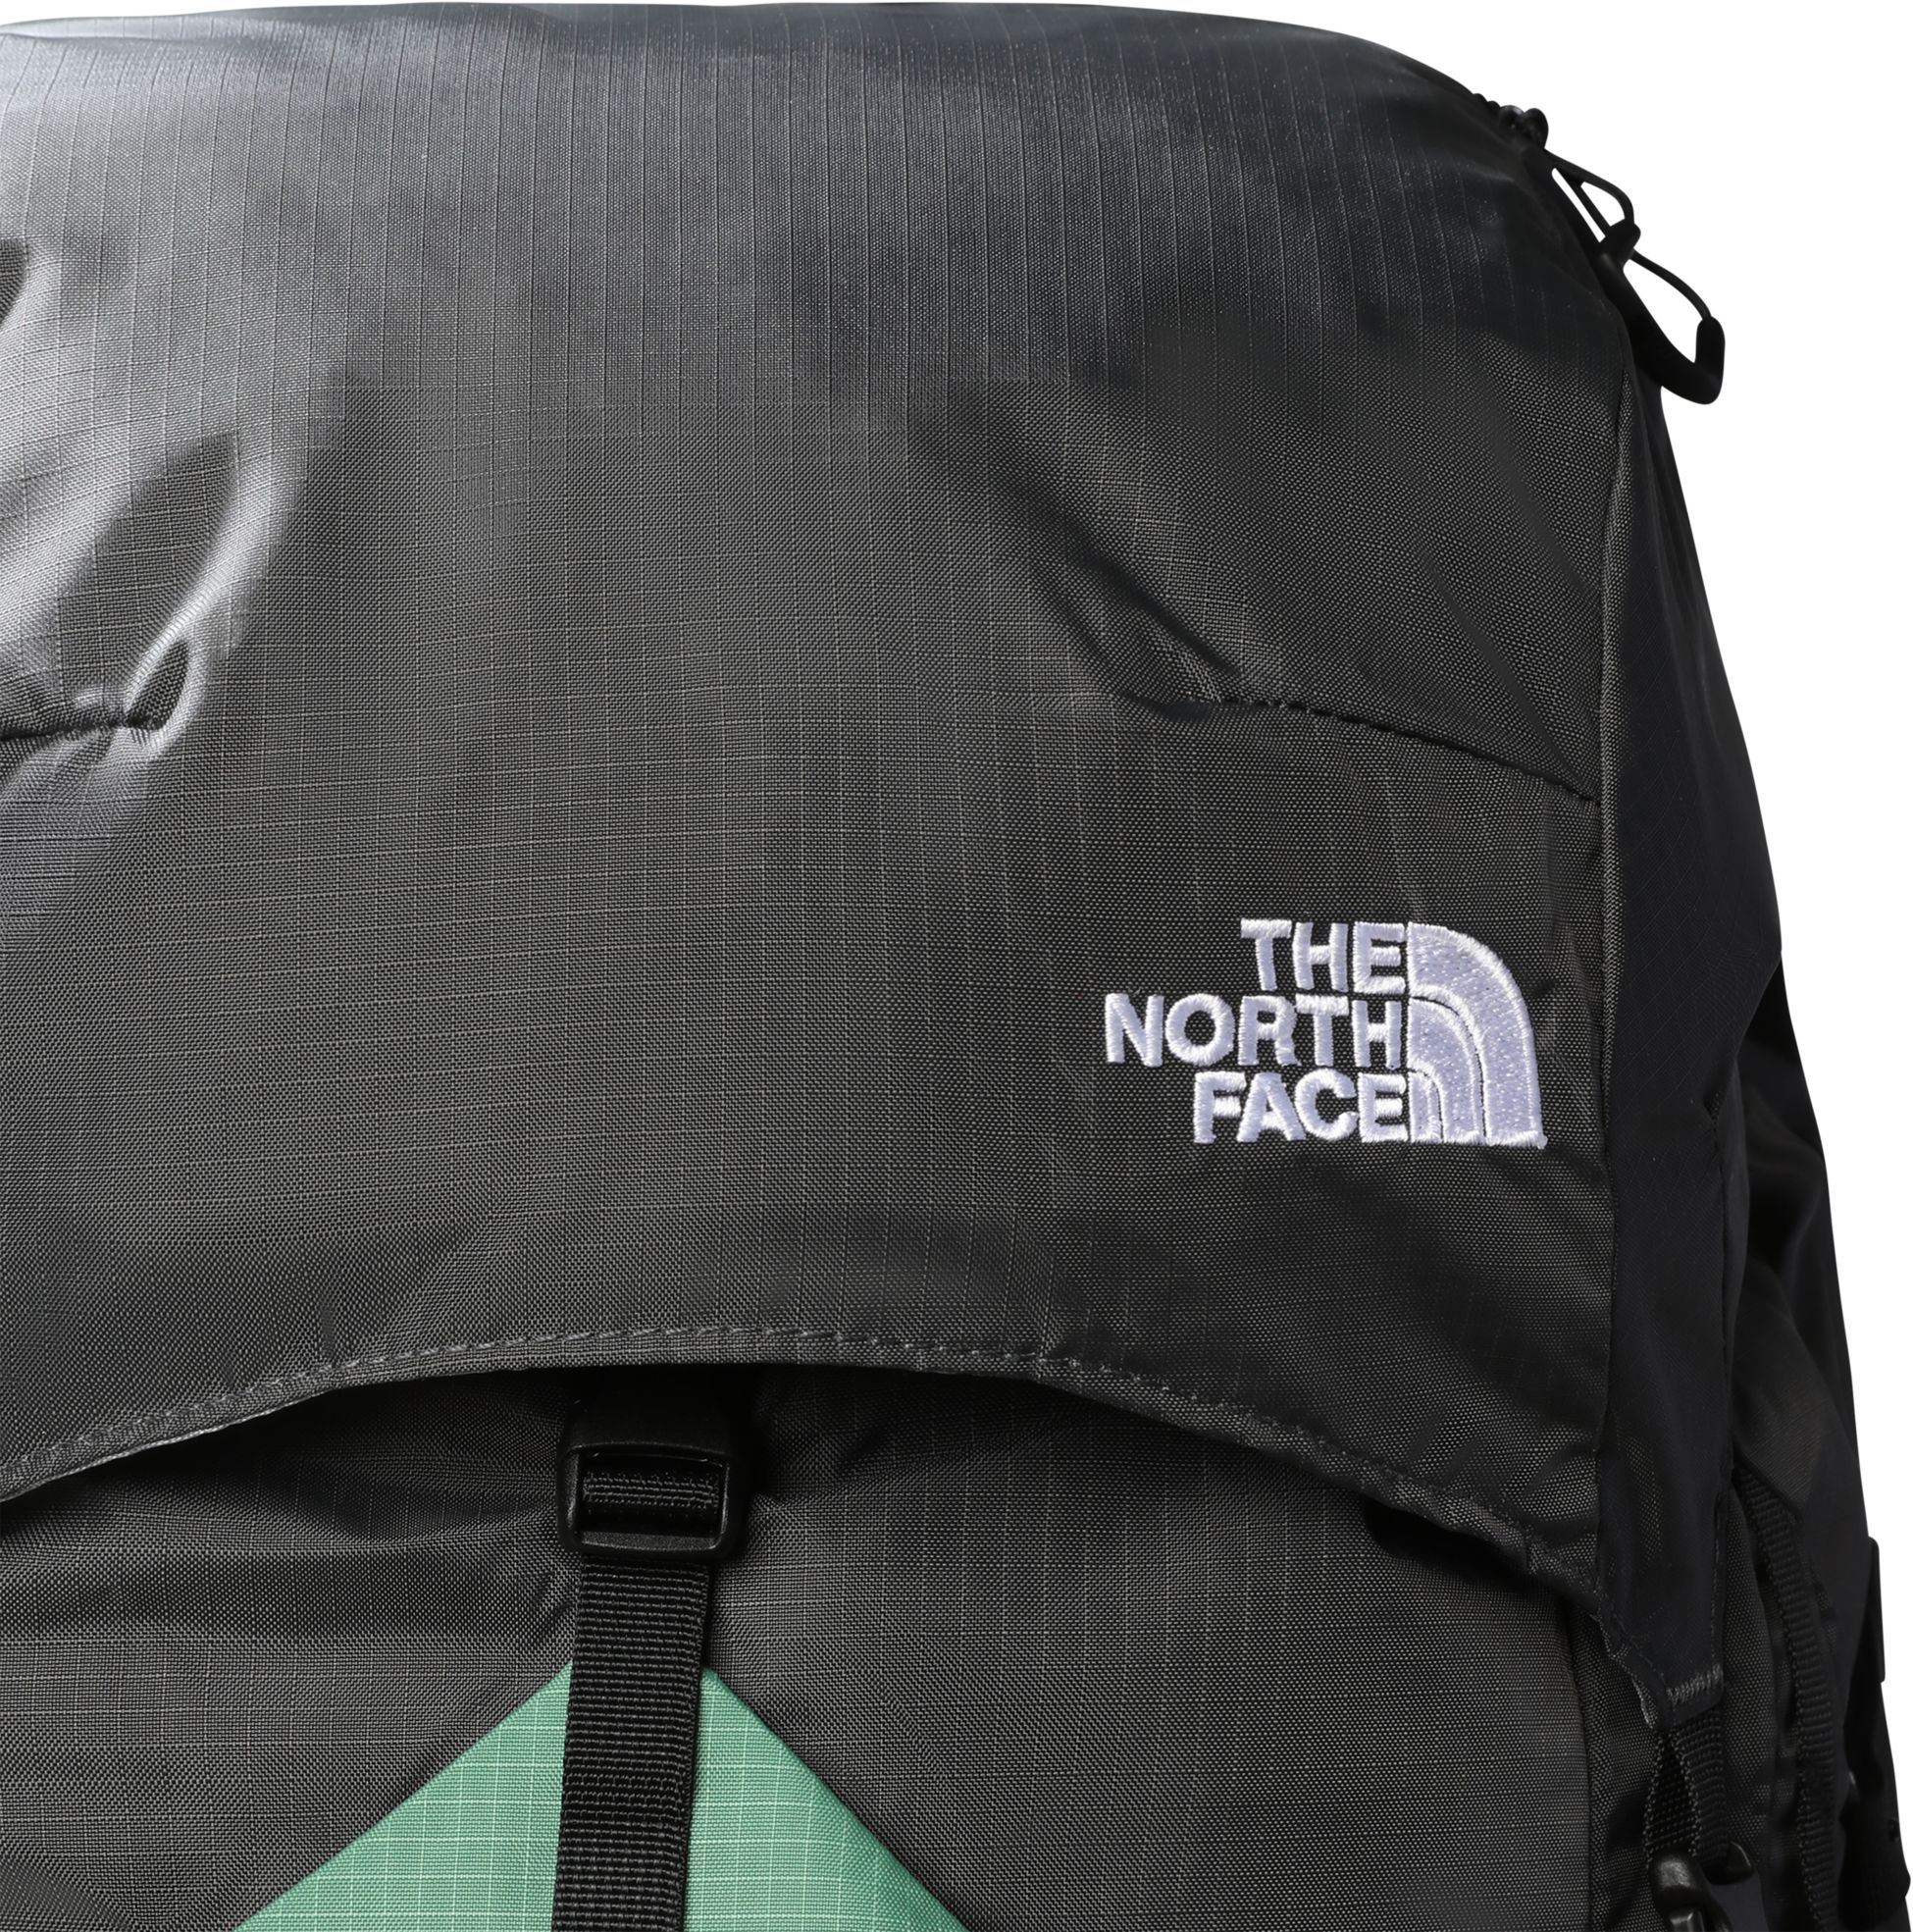 THE NORTH FACE, TRAIL LITE 65